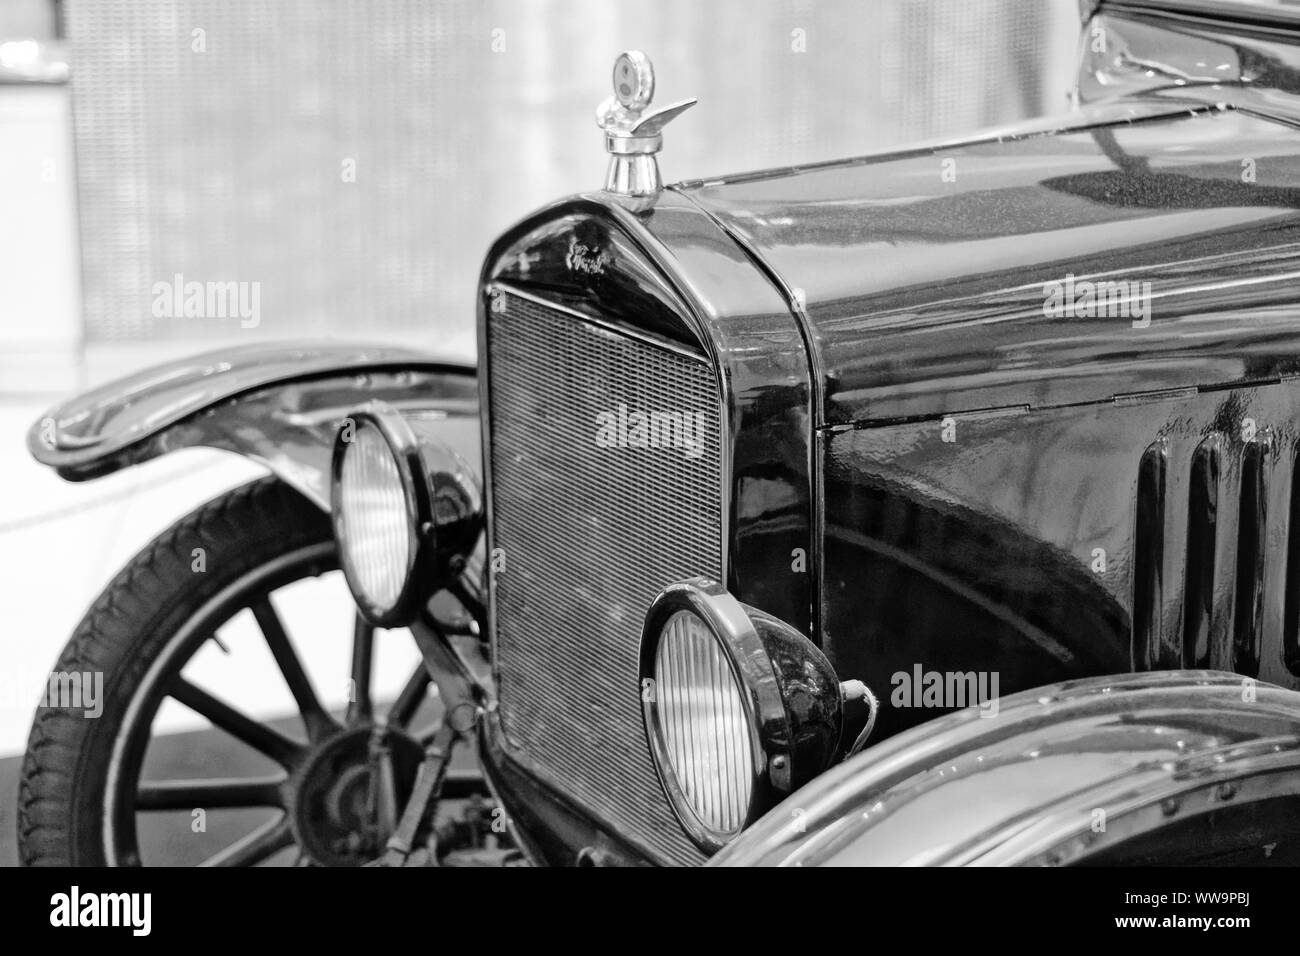 Ford model t illustrations Black and White Stock Photos & Images - Alamy